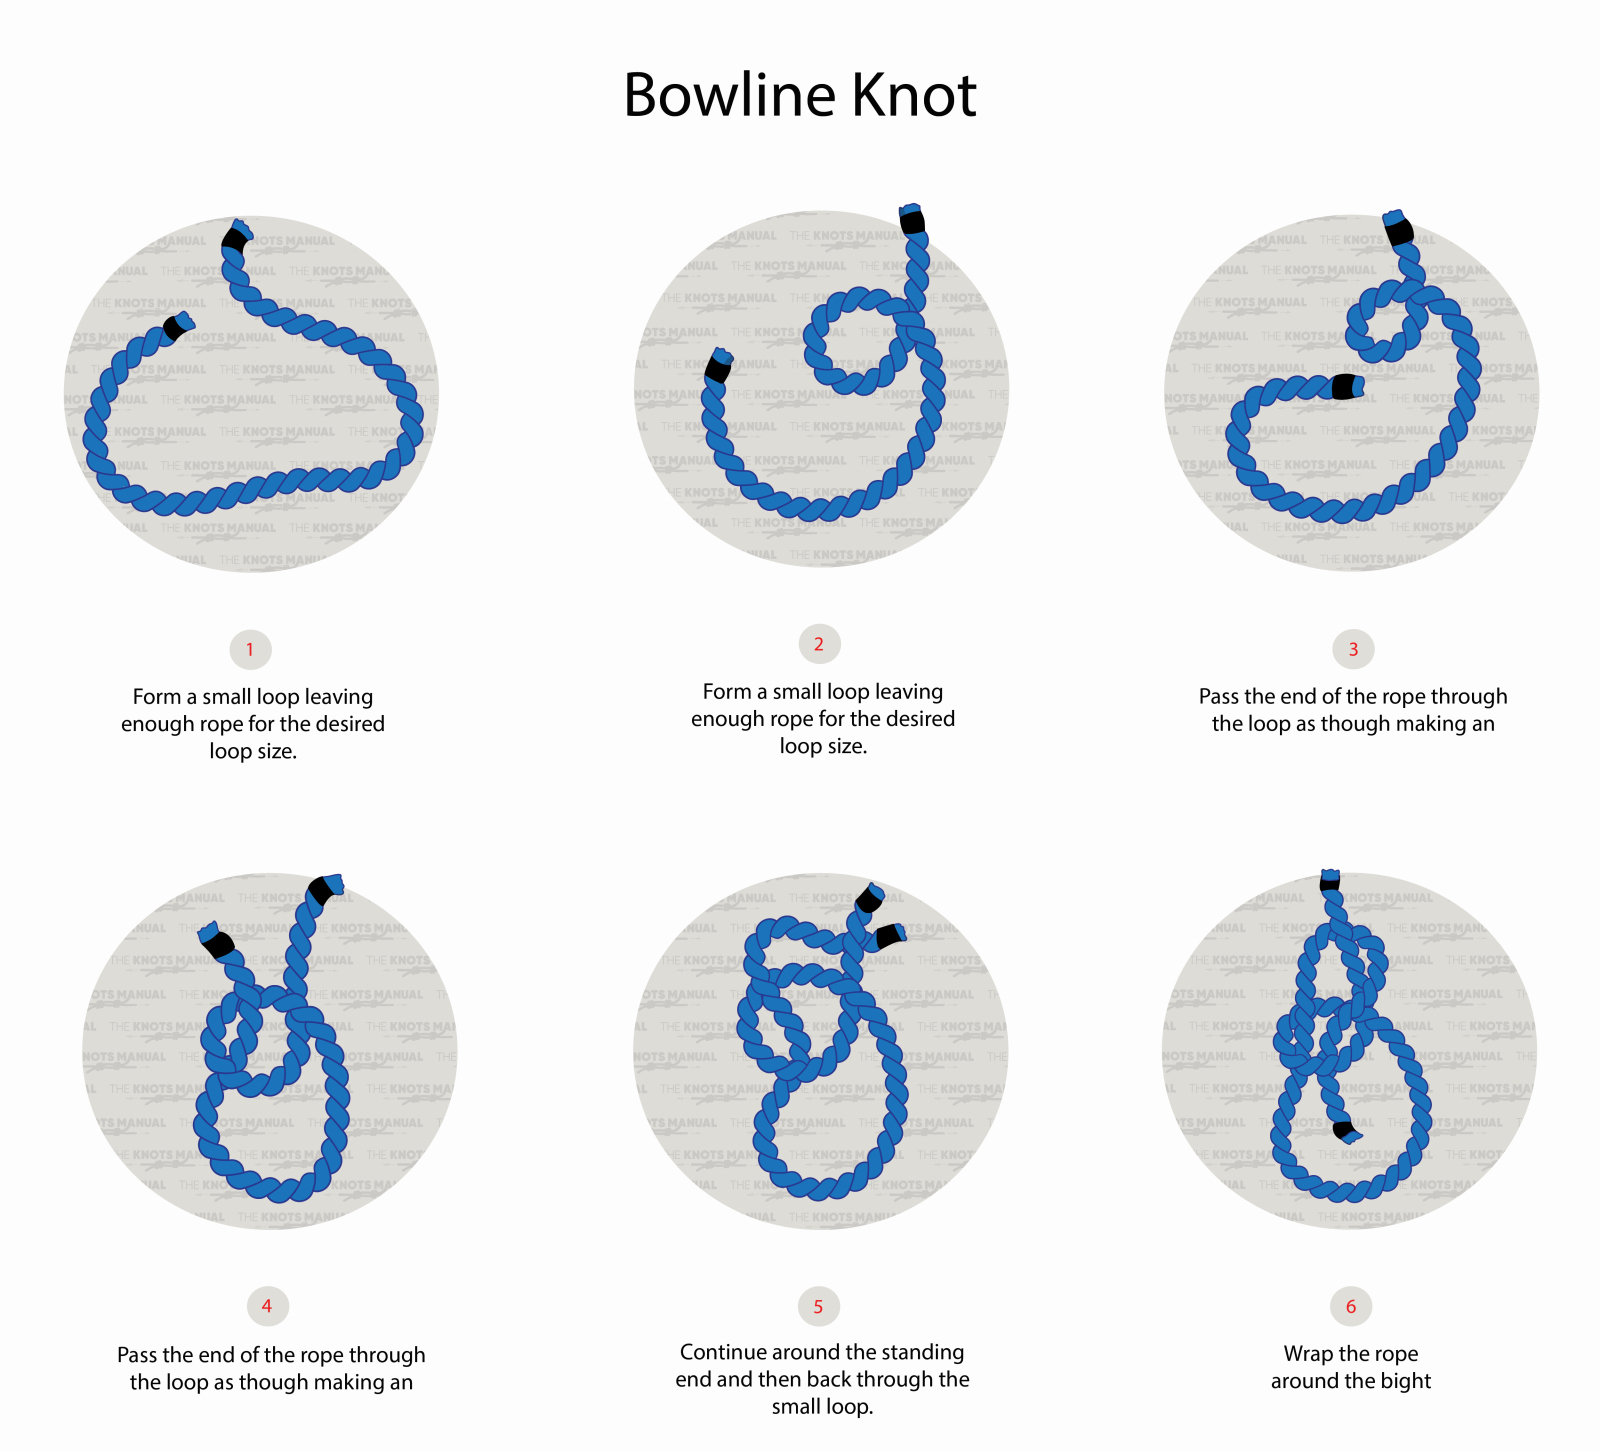 How to tie a bowline knot - step by step